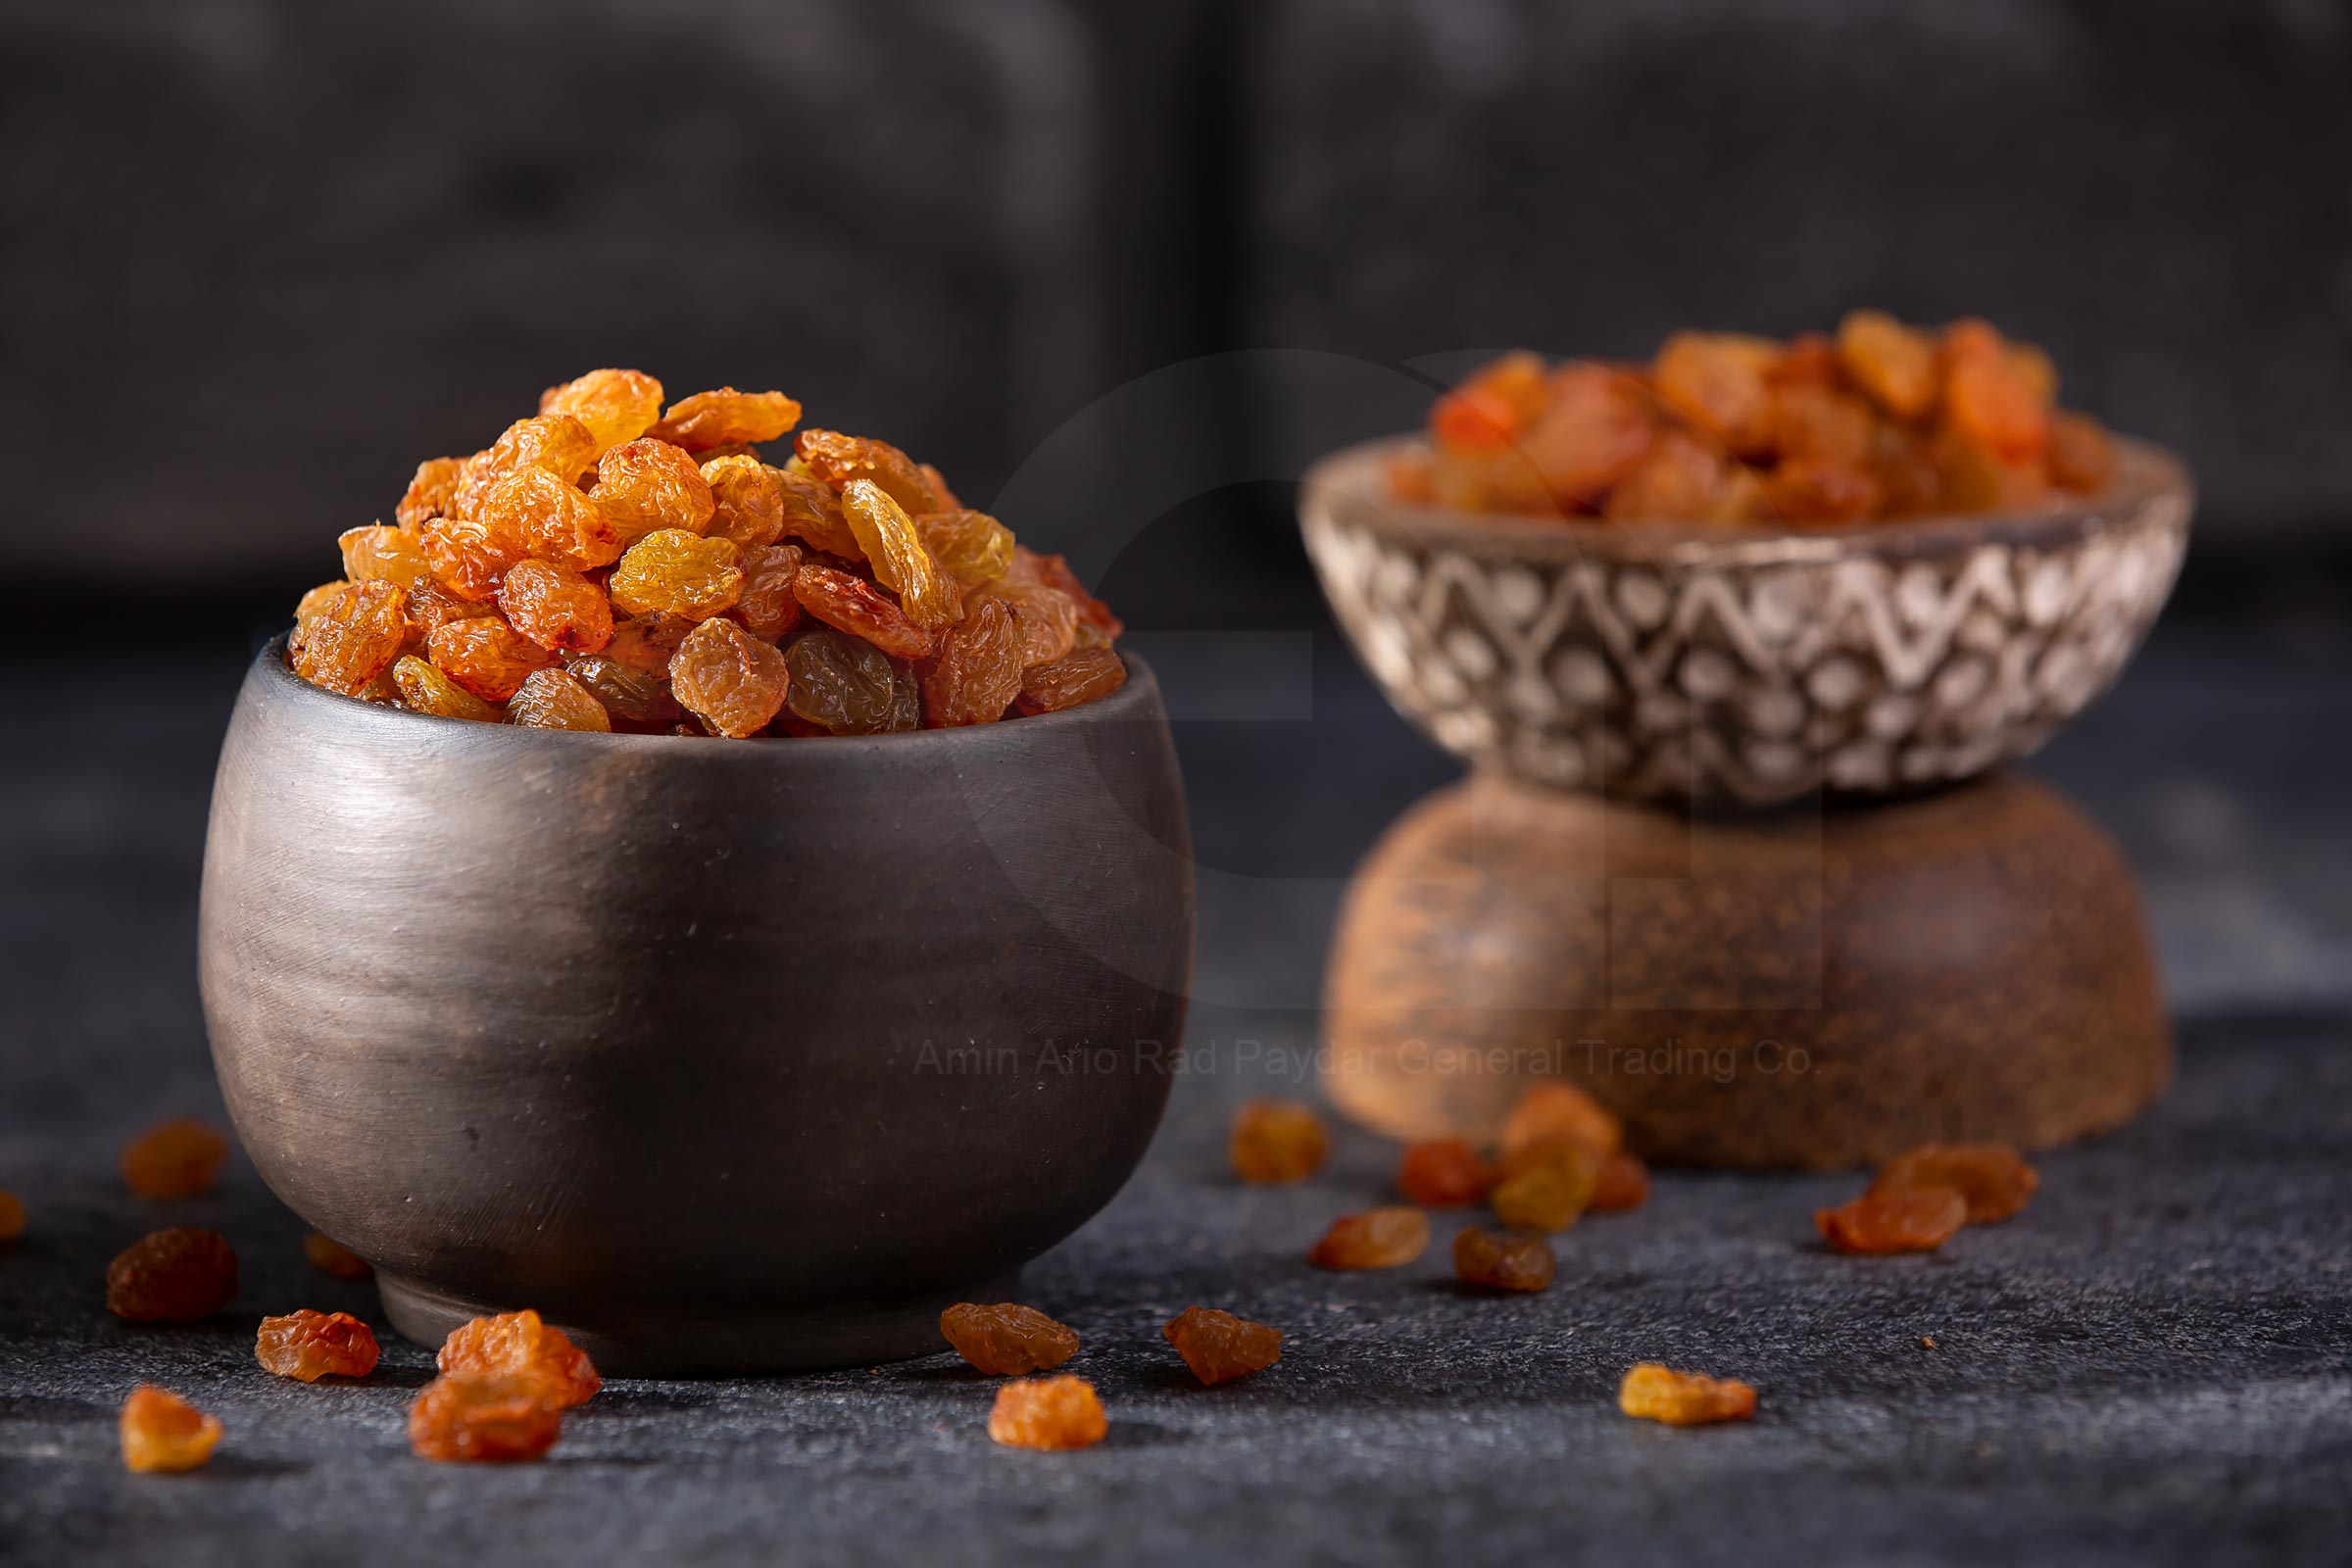 Benefits and harms of dry fruits for our health